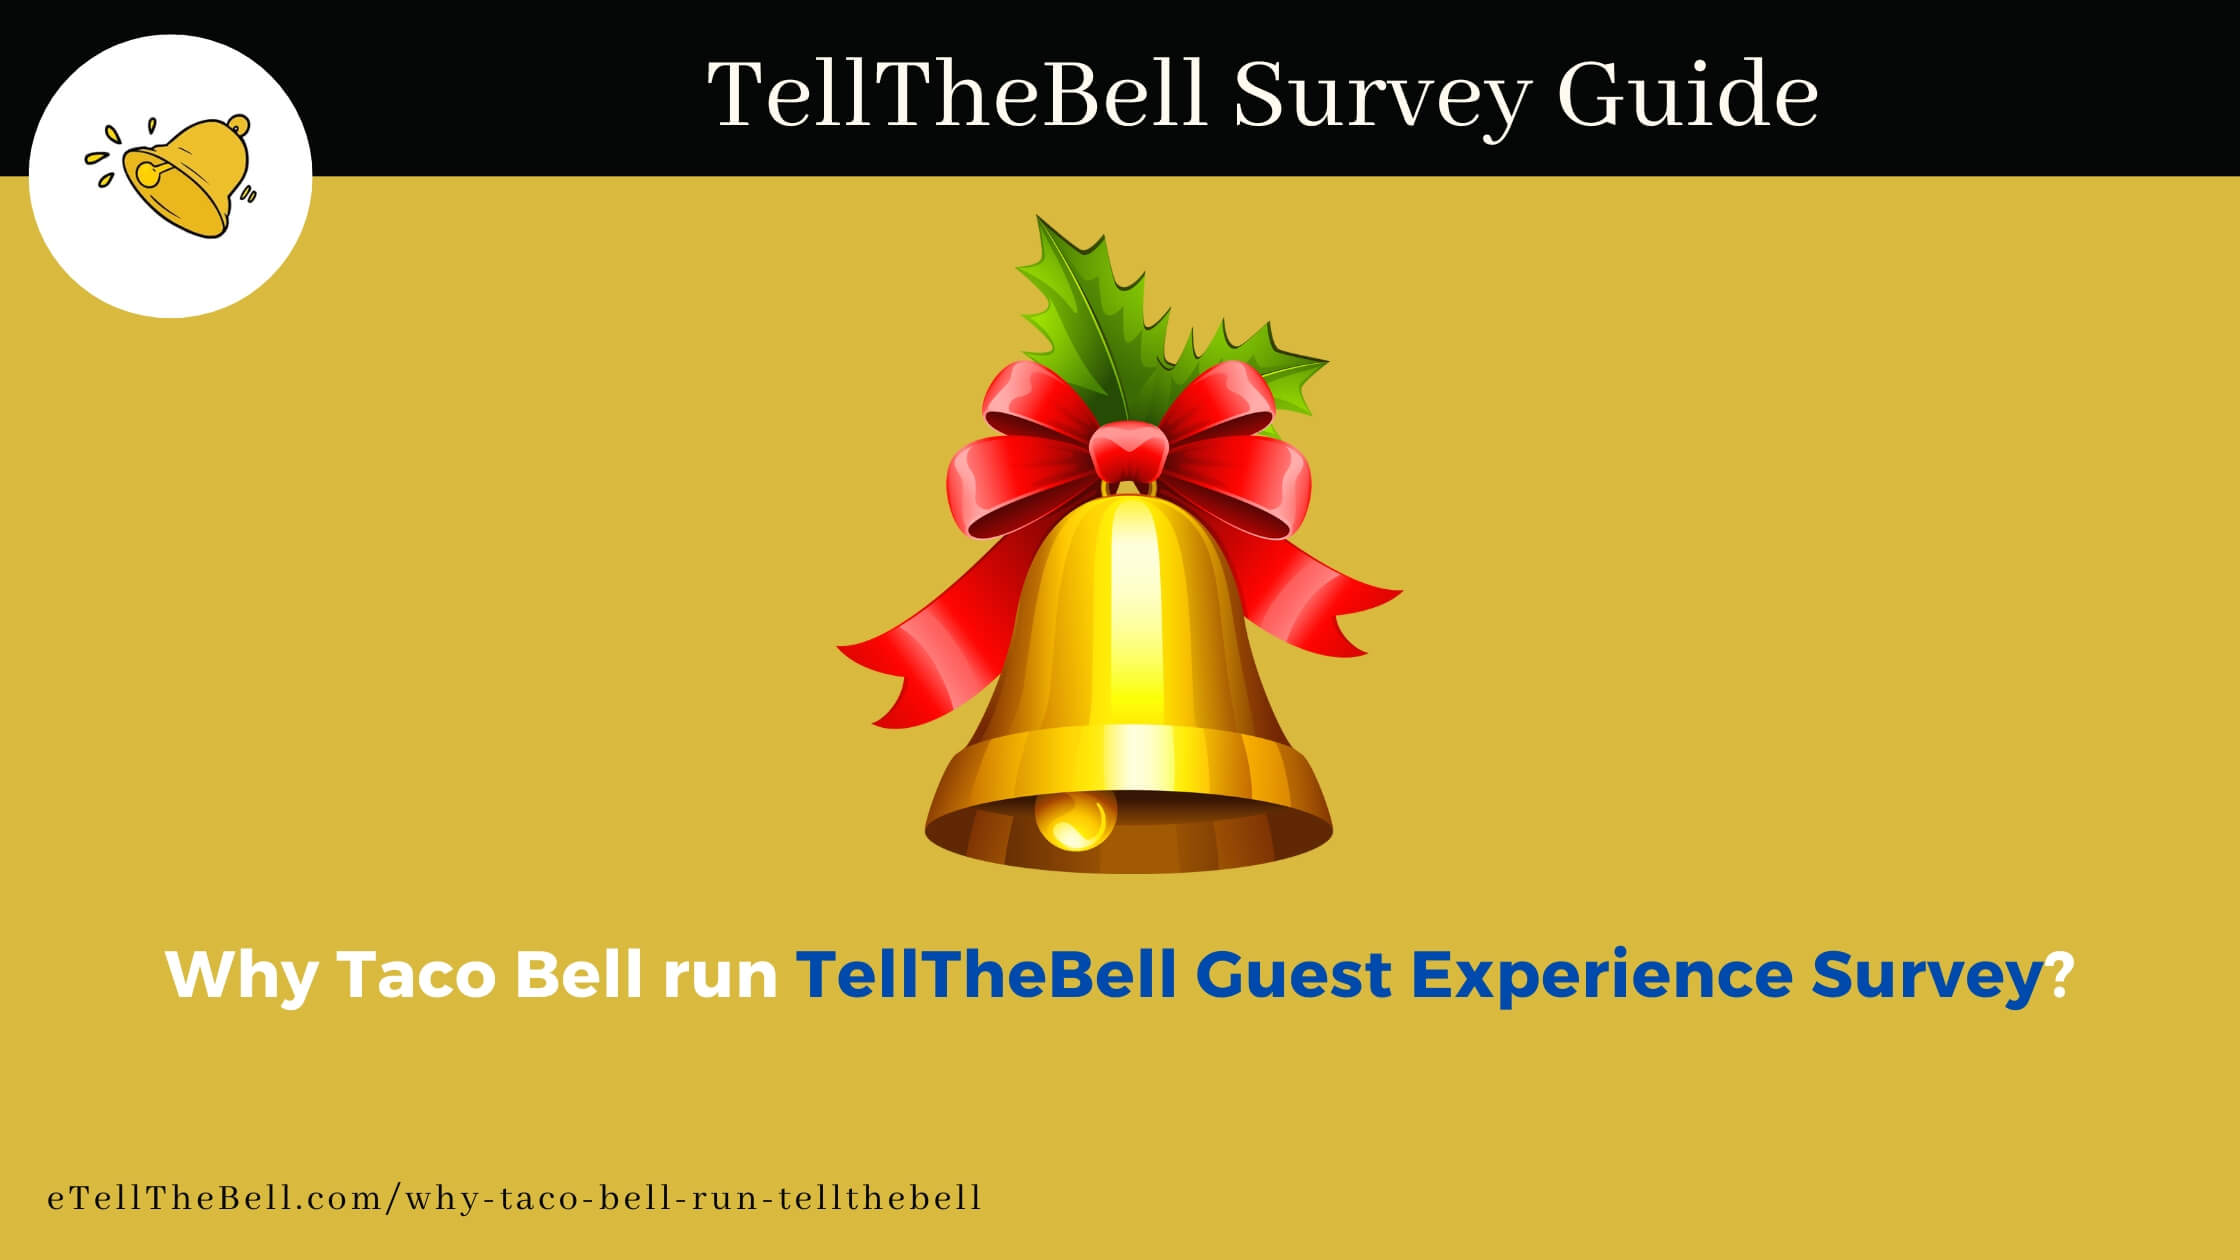 Why Taco Bell run TellTheBell Guest Experience Survey